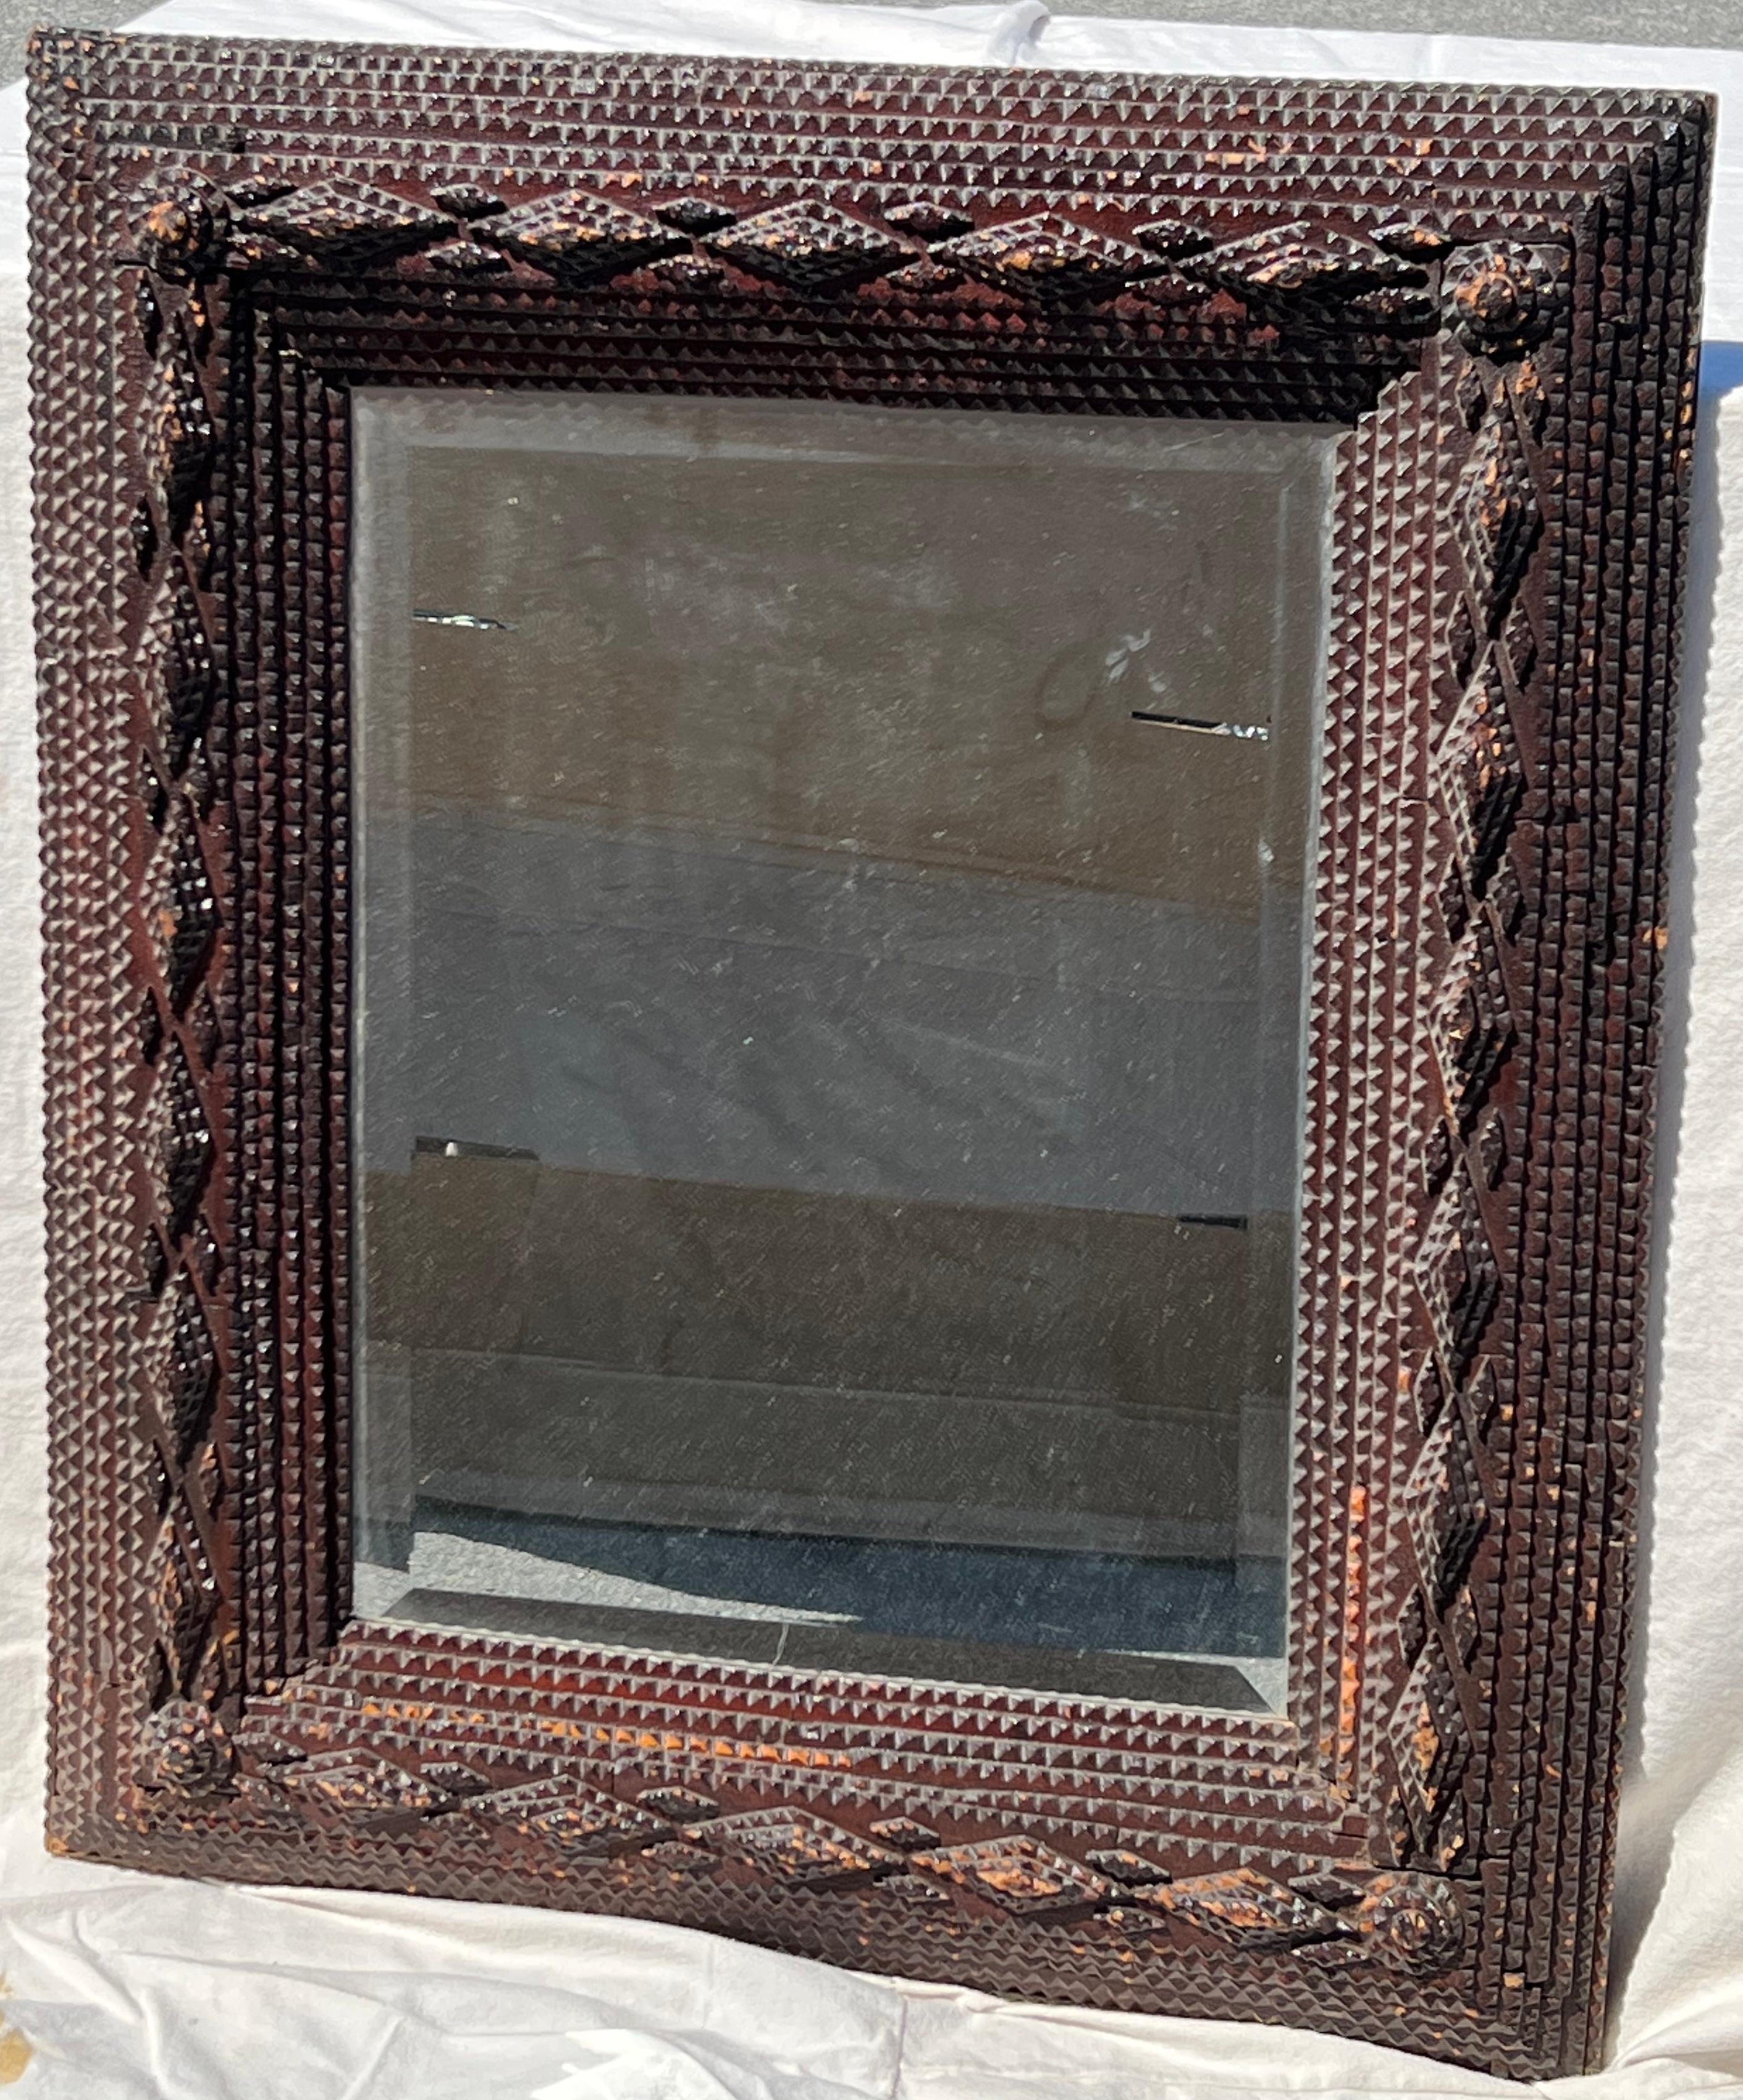 Late 19th century Tramp Art frame with applied, stepped, chip-carved surface displaying diamond patterns and rosettes at corners. Great old surface with later inset mirror.